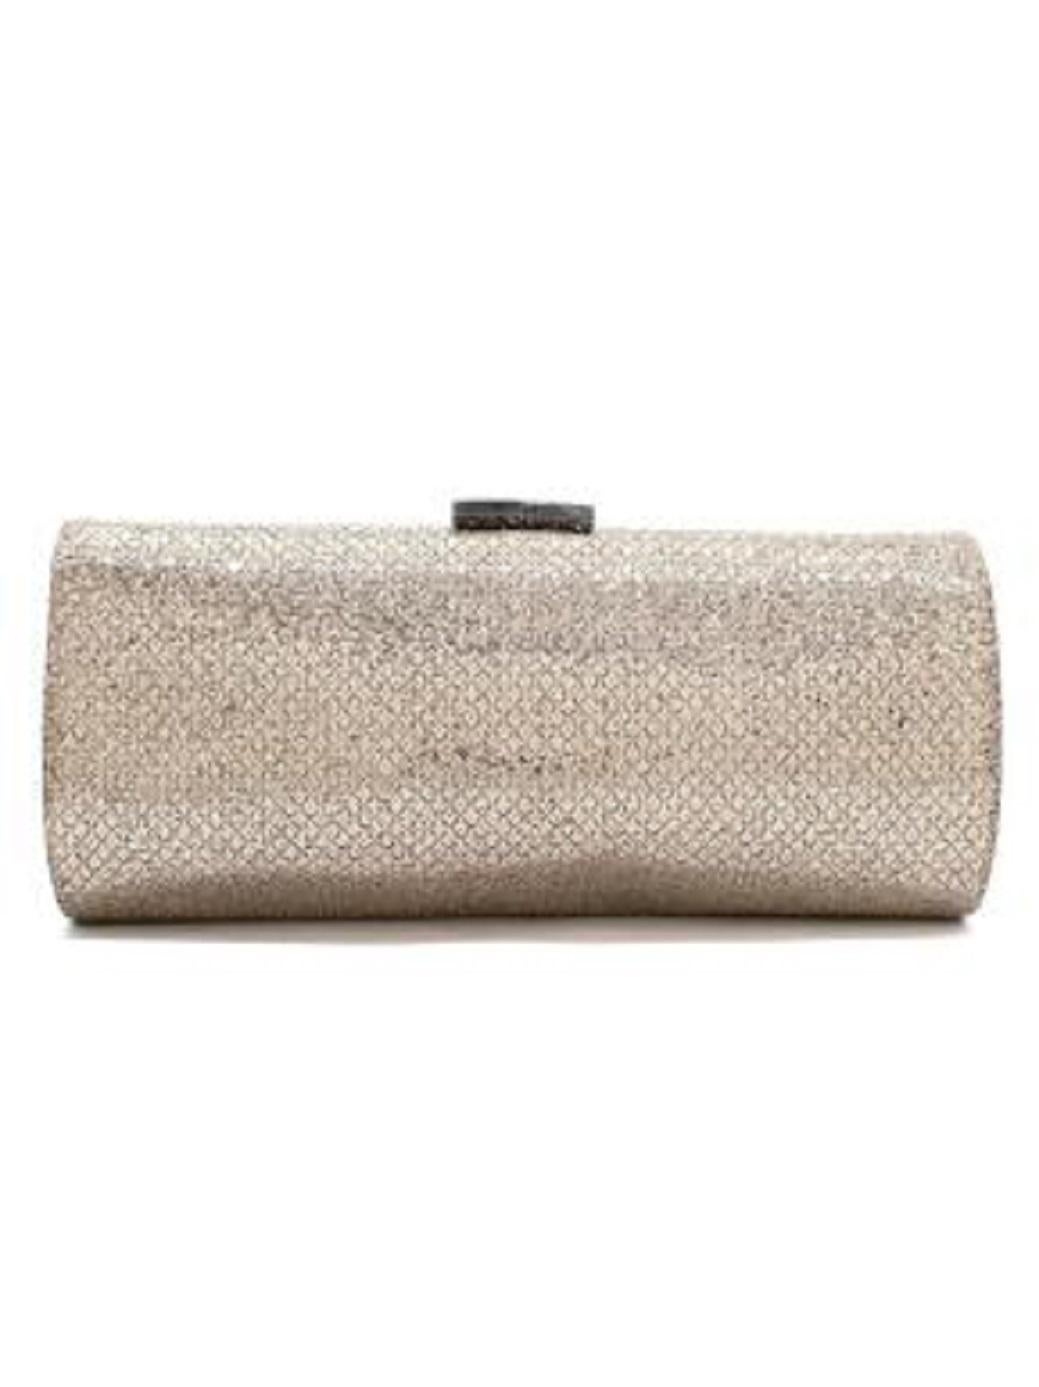 Jimmy Choo Champagne Sequin Embellished Clutch In Good Condition For Sale In London, GB